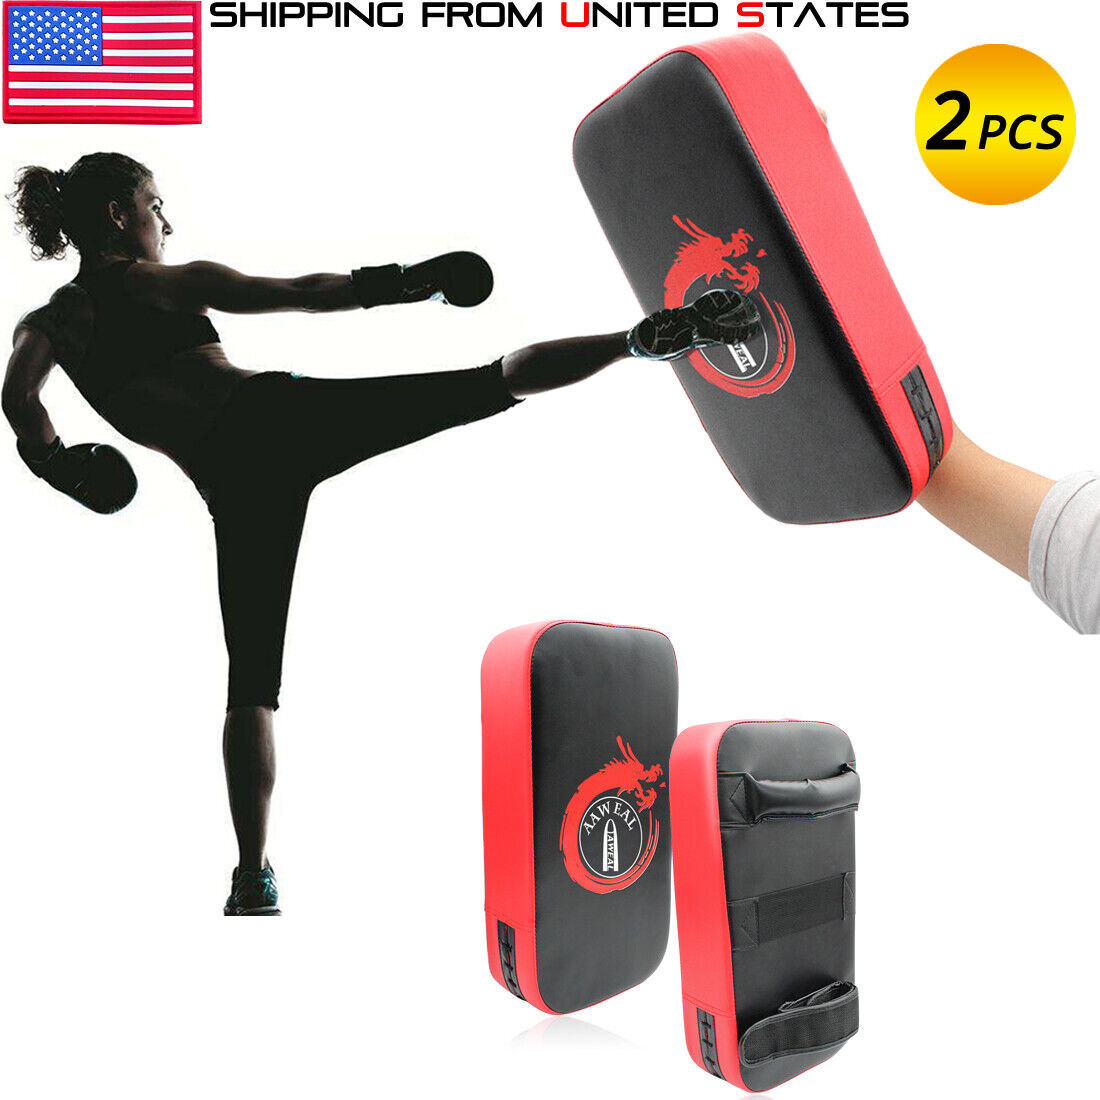 2 Piece  Kick Boxing Strike Curved Thai Pad MMA Training Focus Target Muay Thai Aaweal Does Not Apply